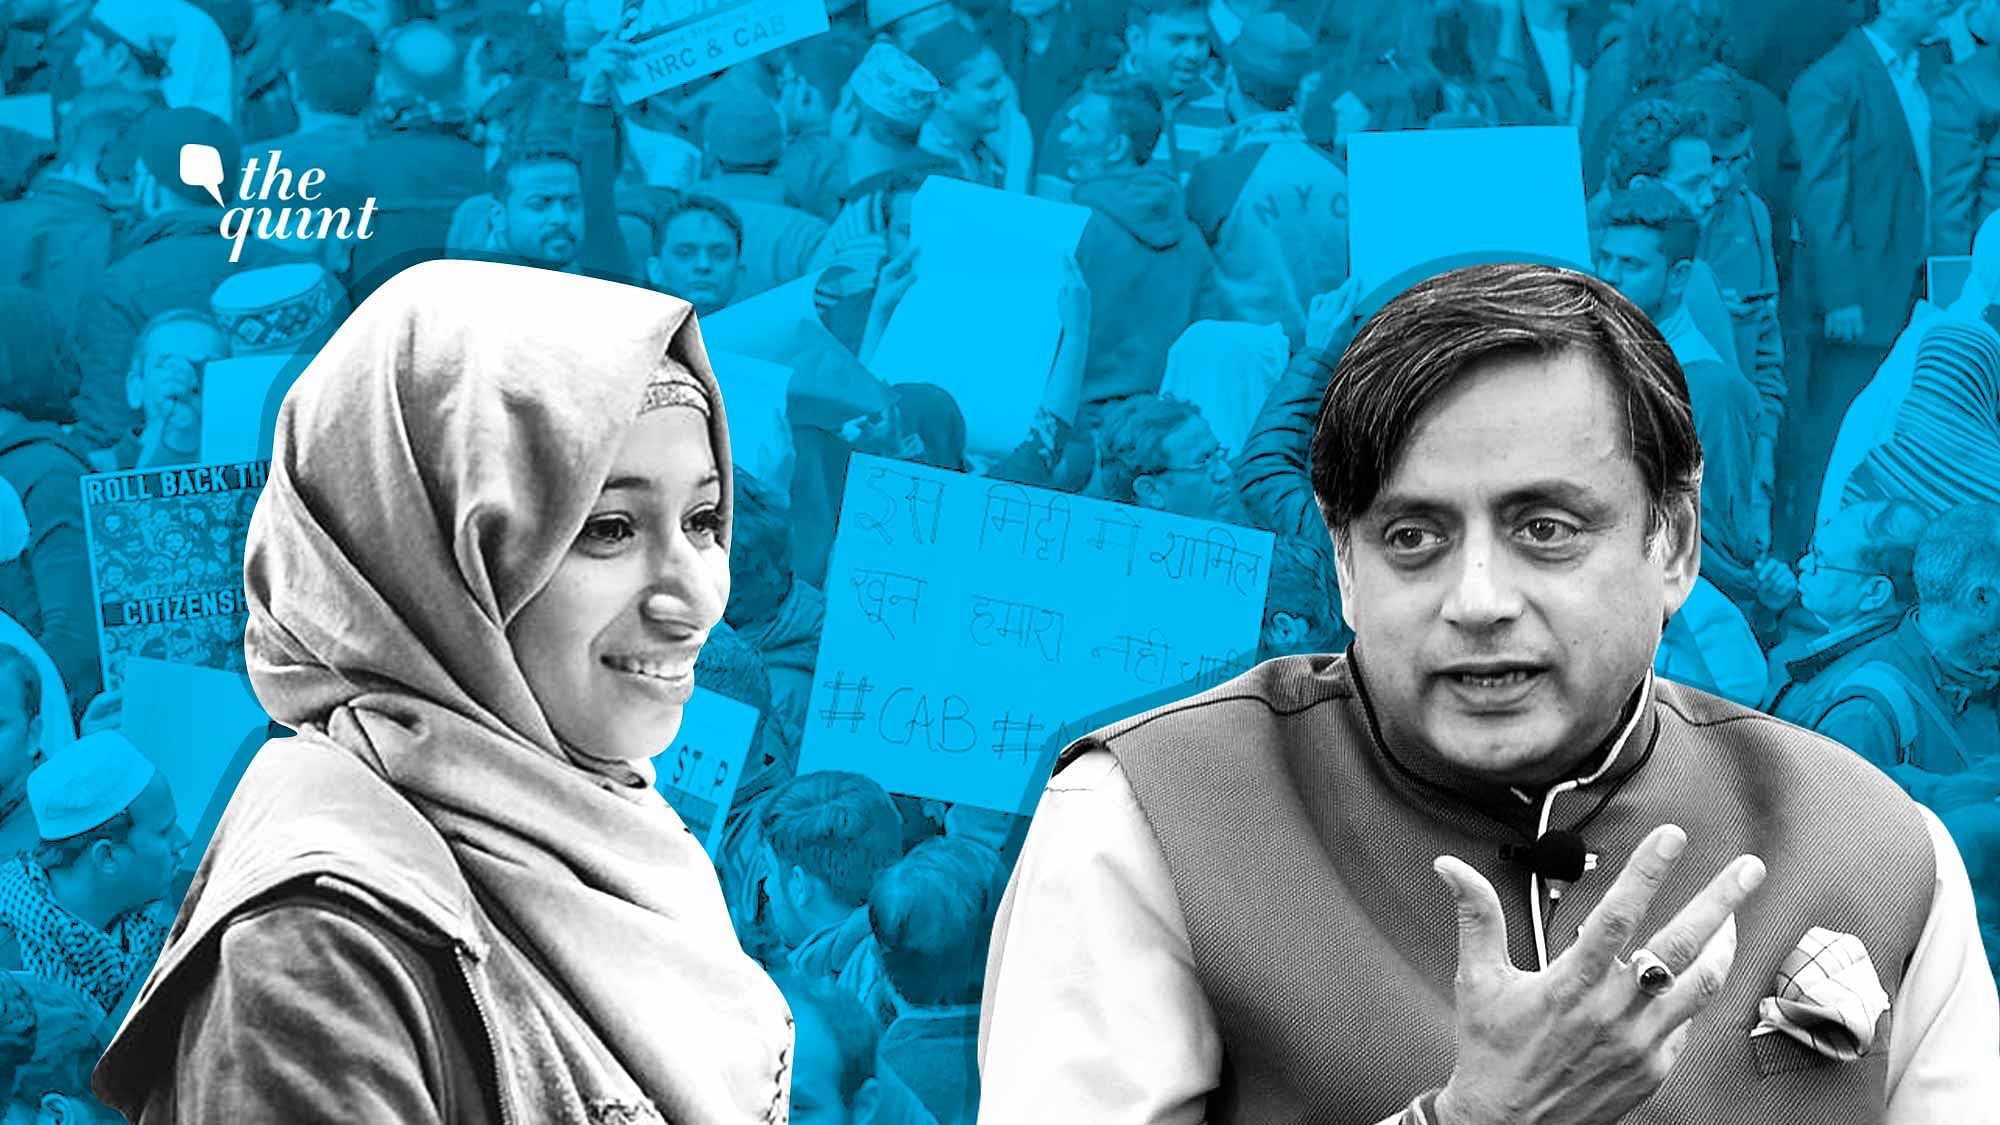 Image of Ladeeda Farzana, author of this open letter, and Dr Shashi Tharoor, used for representational purposes.